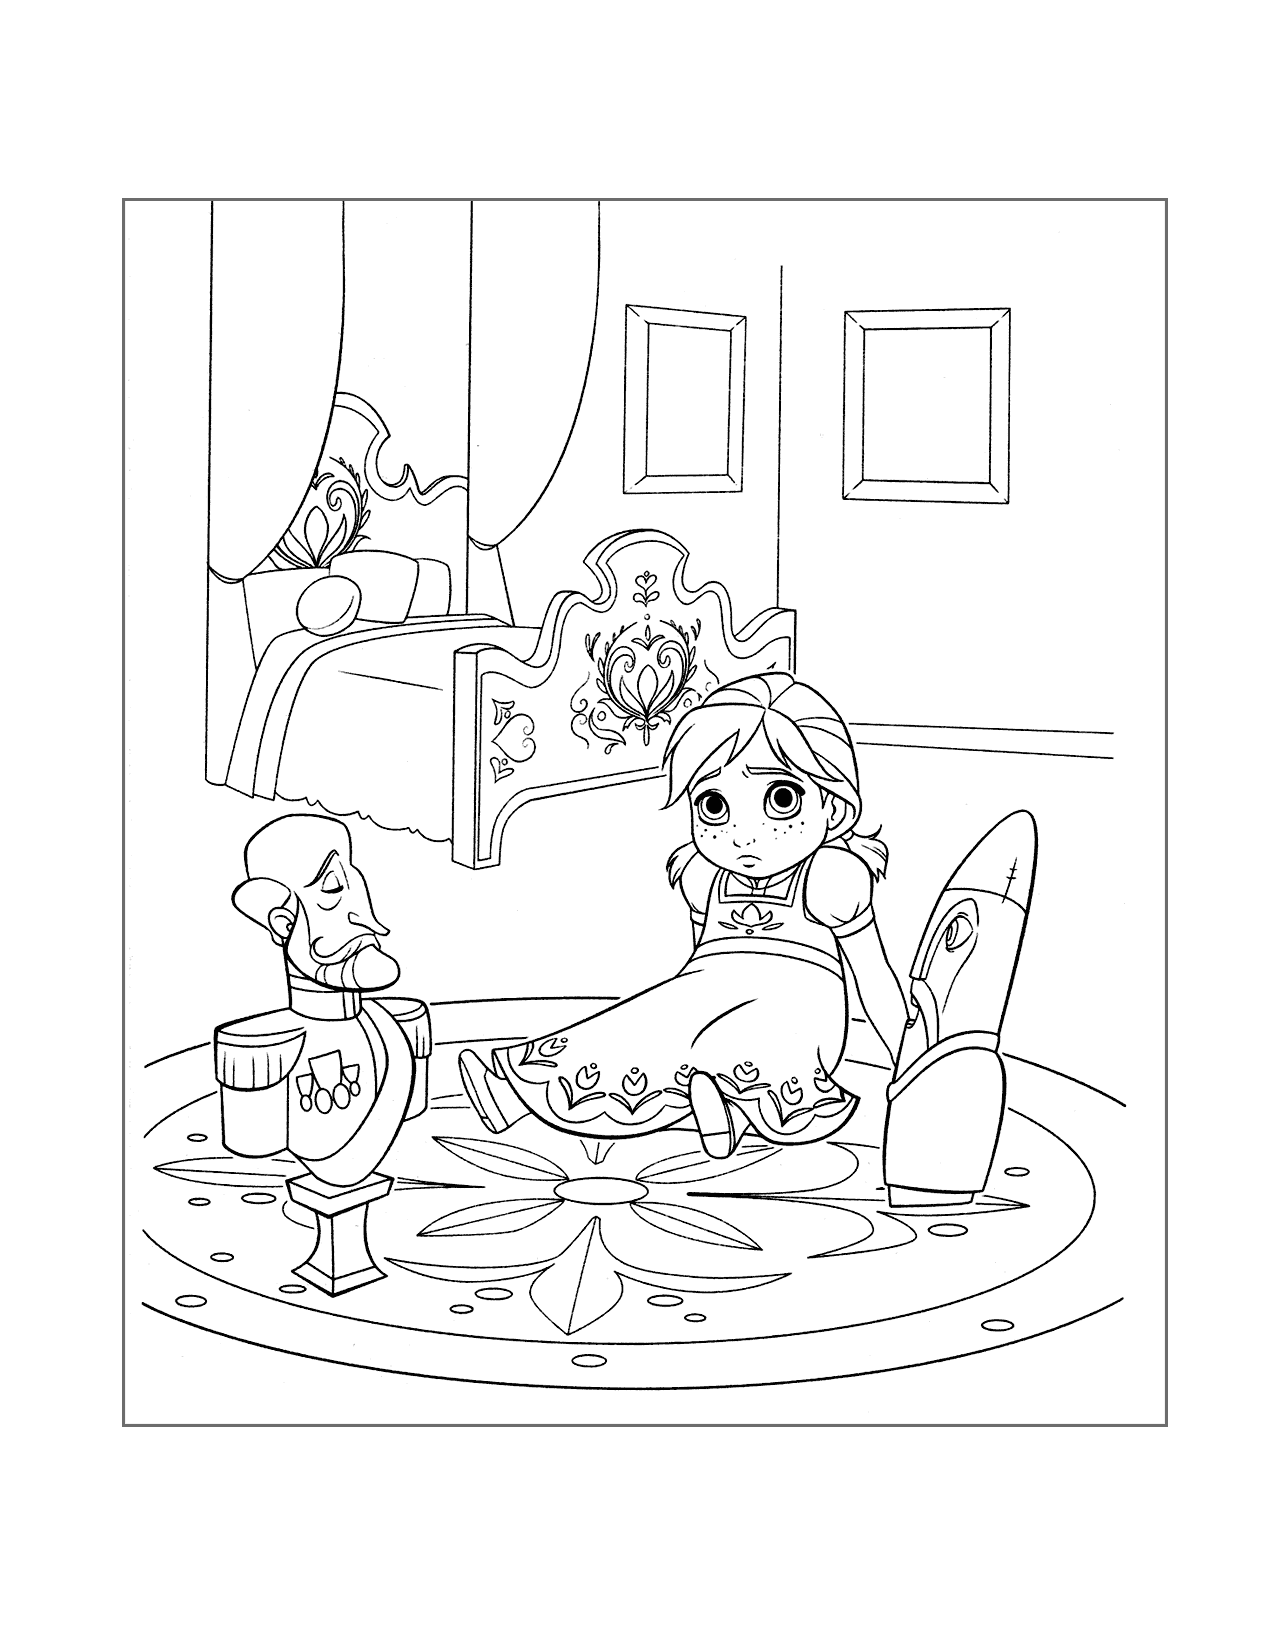 Young Anna Frozen Coloring Page